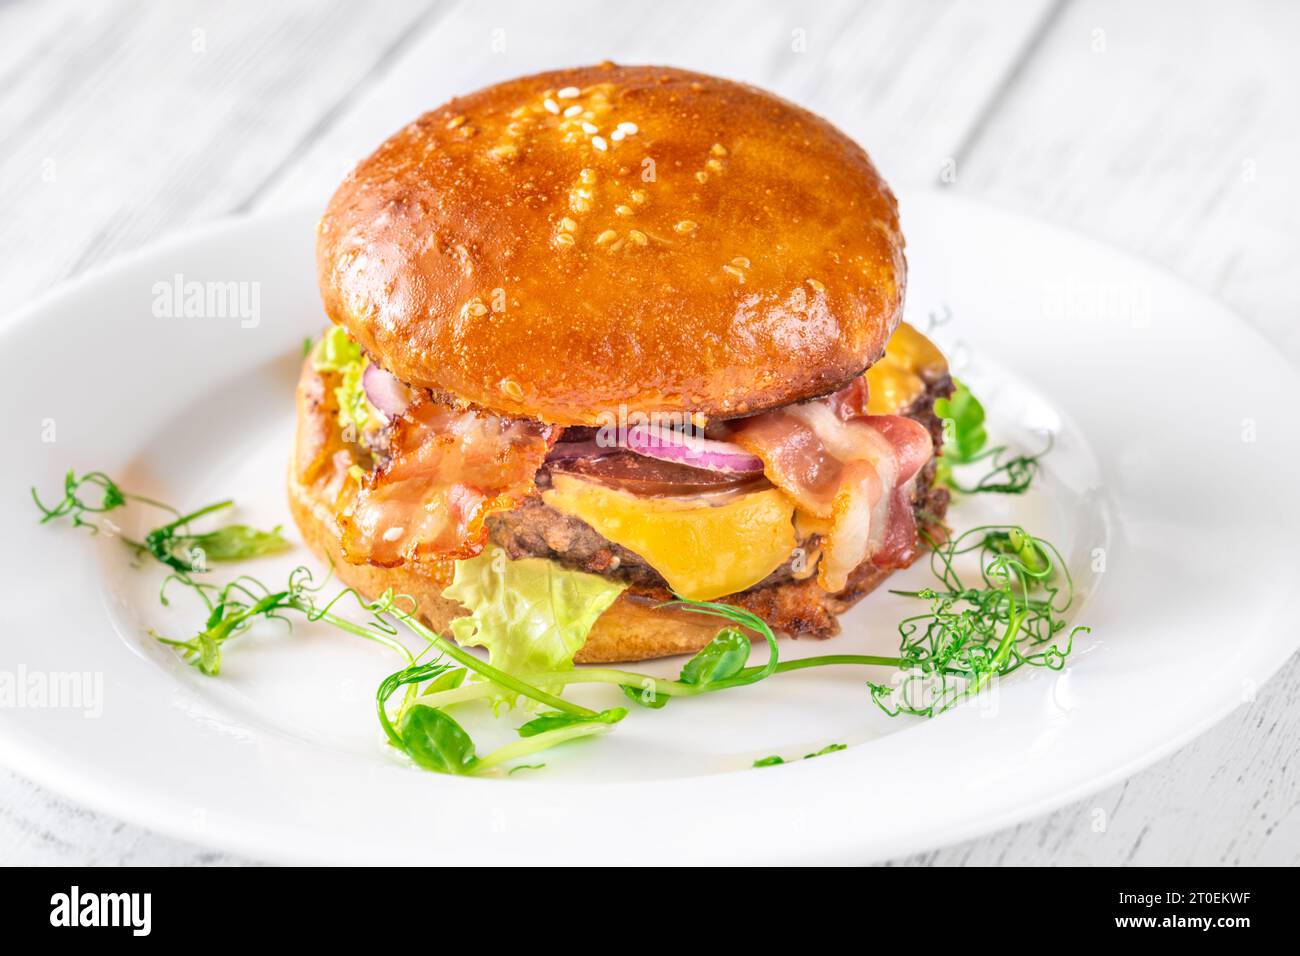 Homemade hamburger with bacon on the plate Stock Photo